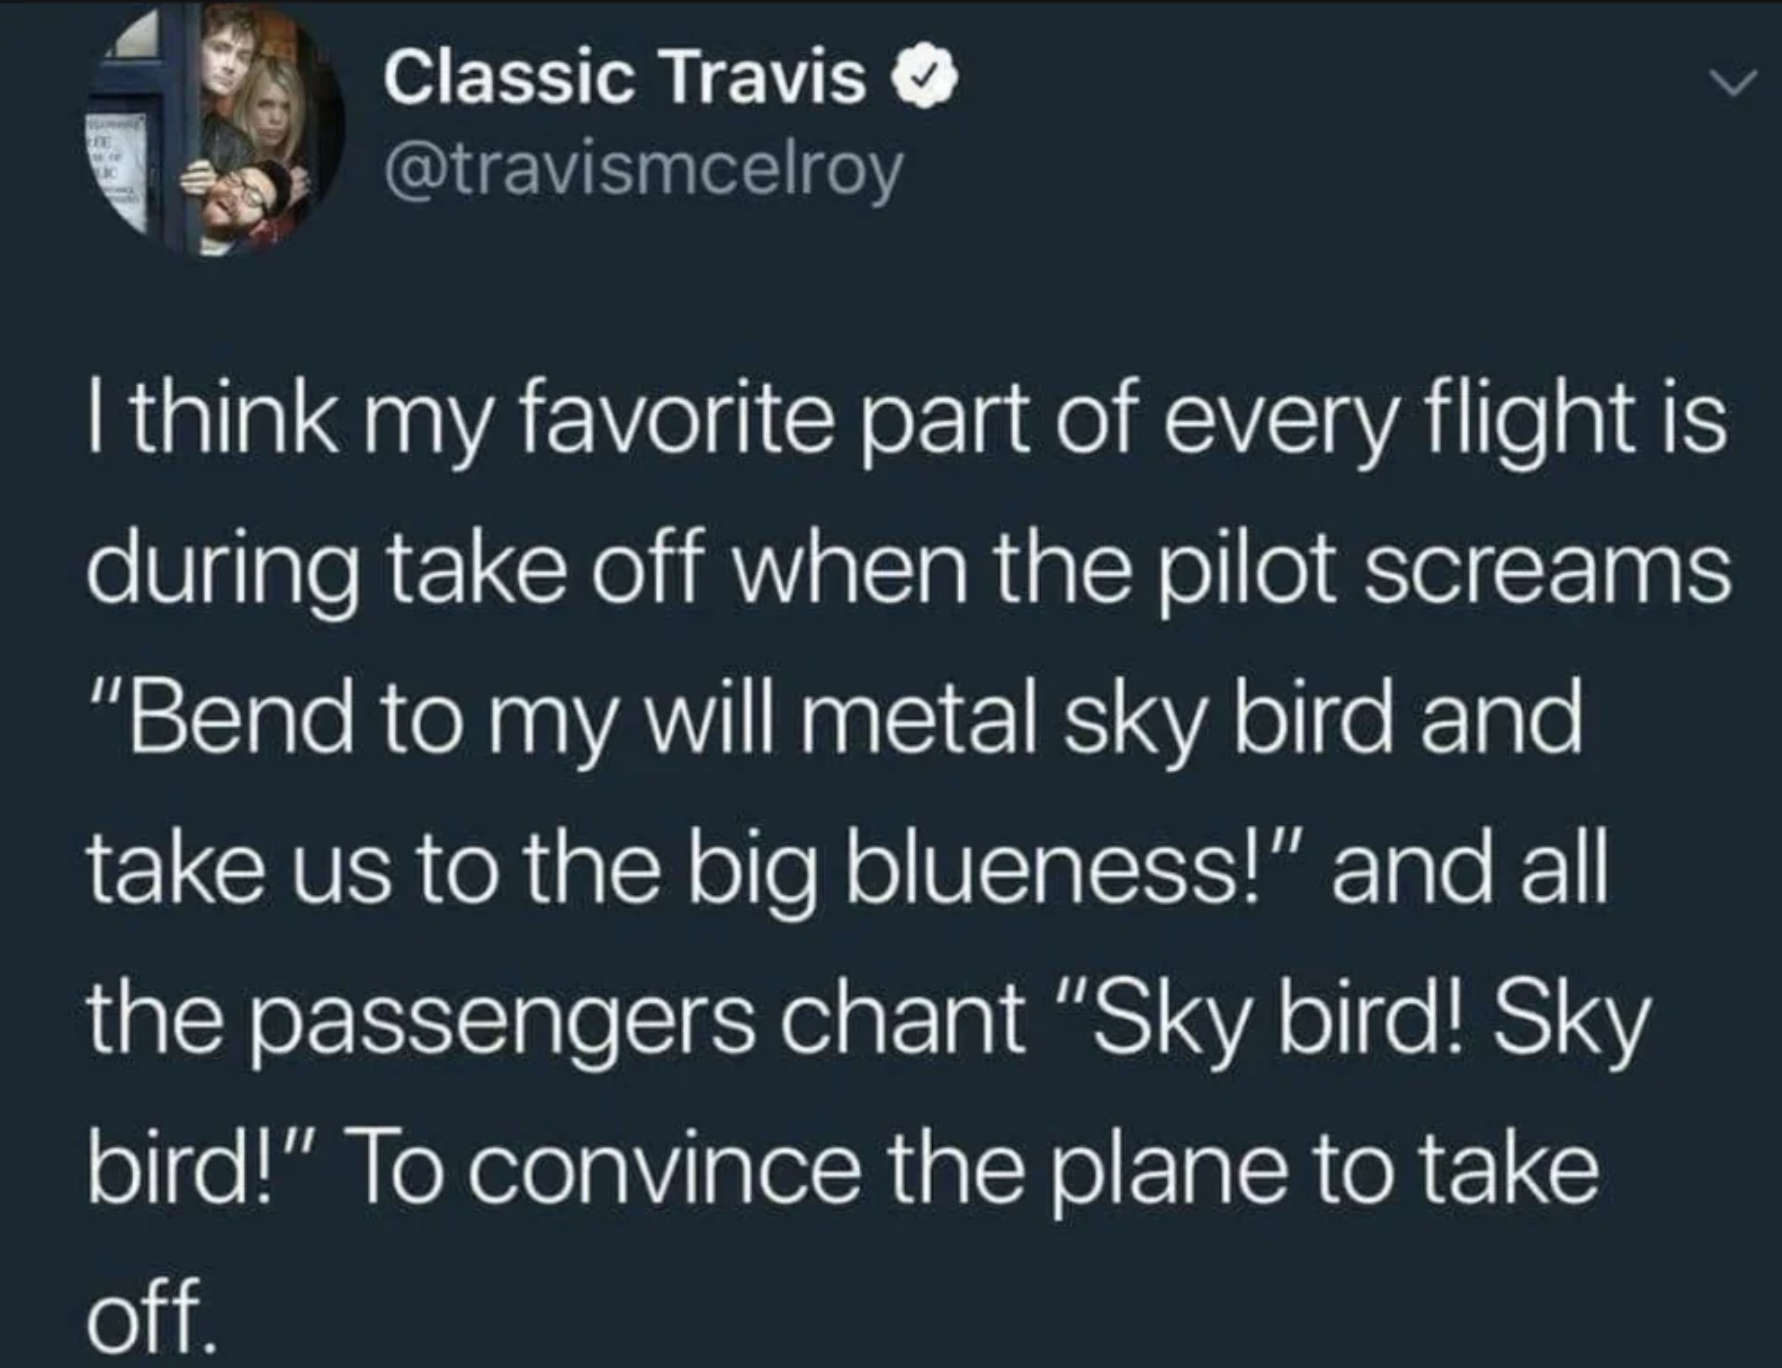 sky bird sky bird - Classic Travis I think my favorite part of every flight is during take off when the pilot screams "Bend to my will metal sky bird and take us to the big blueness!" and all the passengers chant "Sky bird! Sky bird!" To convince the plan